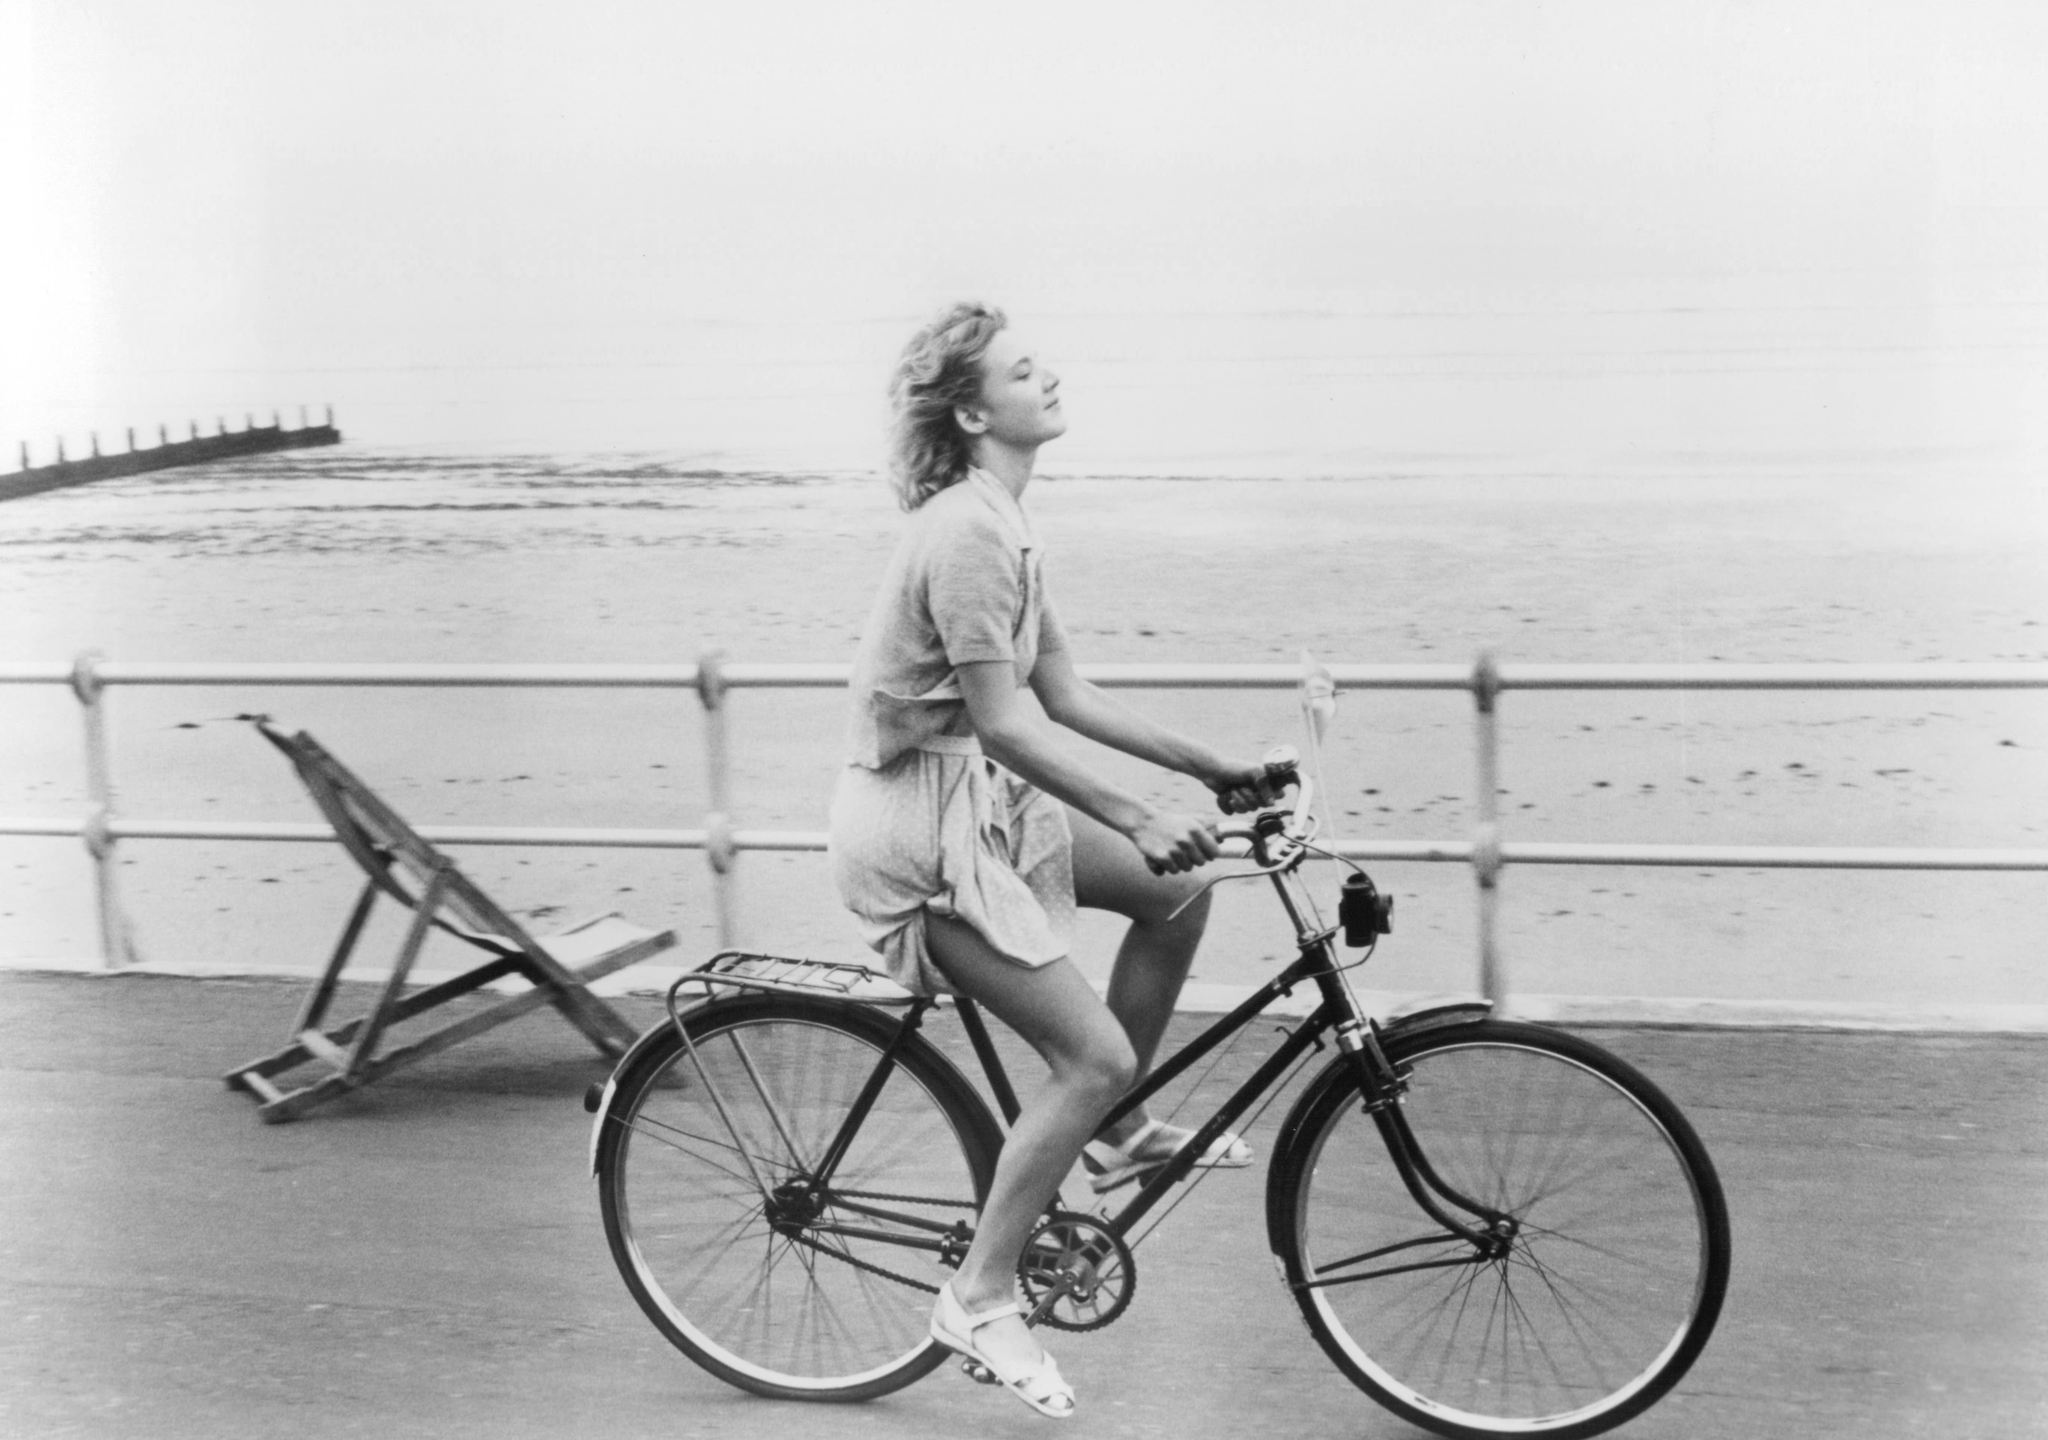 Still of Emily Lloyd in Wish You Were Here (1987)